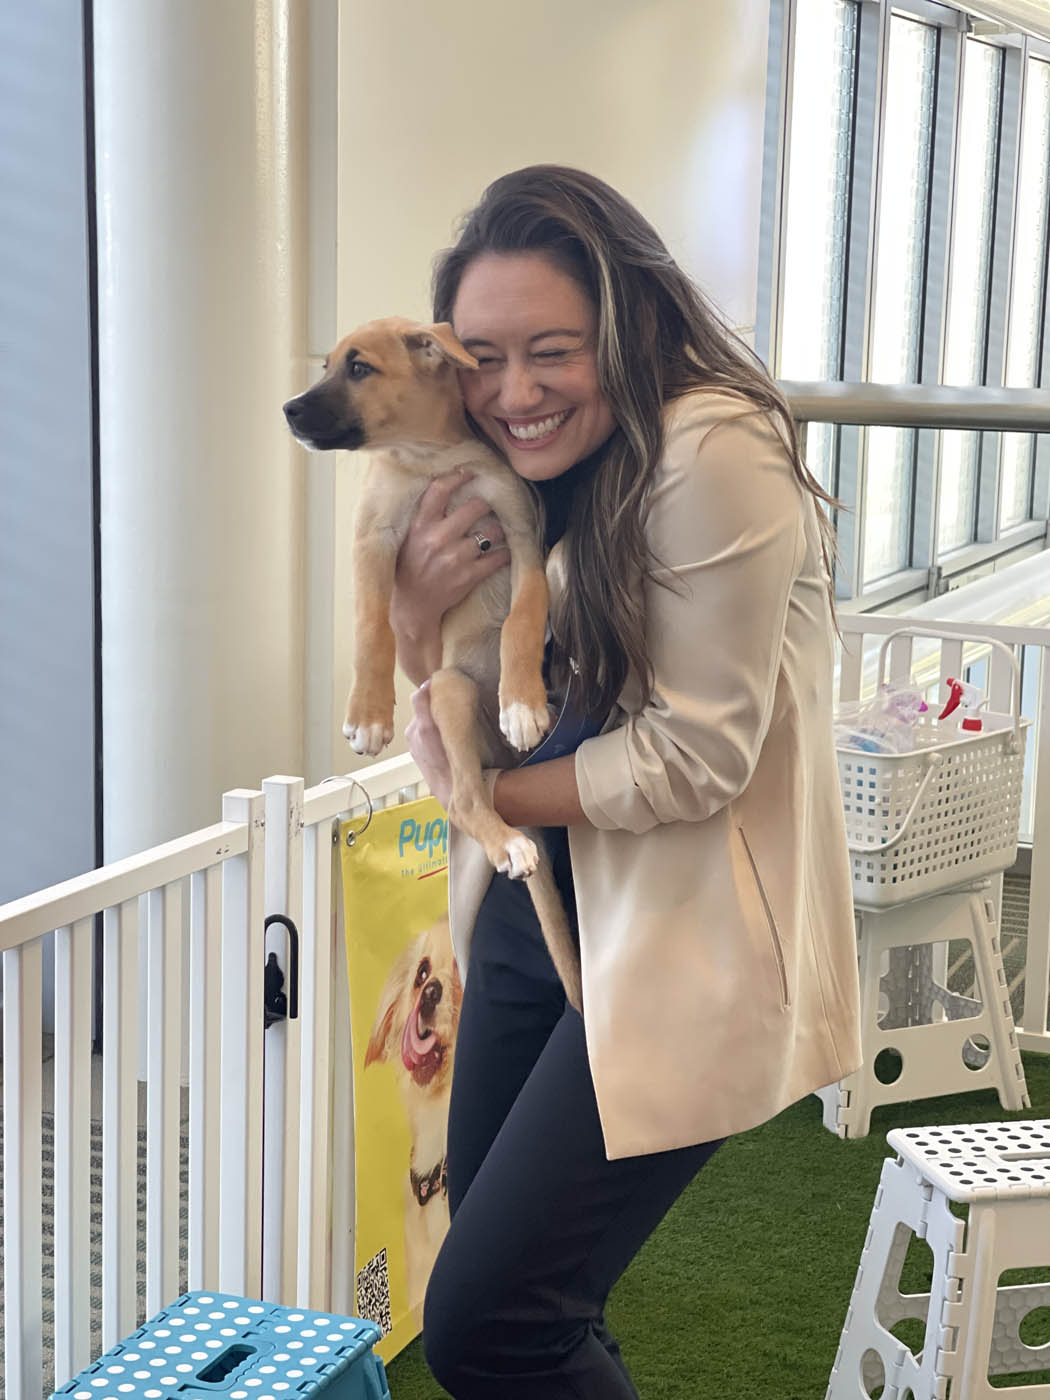 A woman holding a puppy and experiencing so much joy thanks to Puppy Love in Las Vegas, NV.